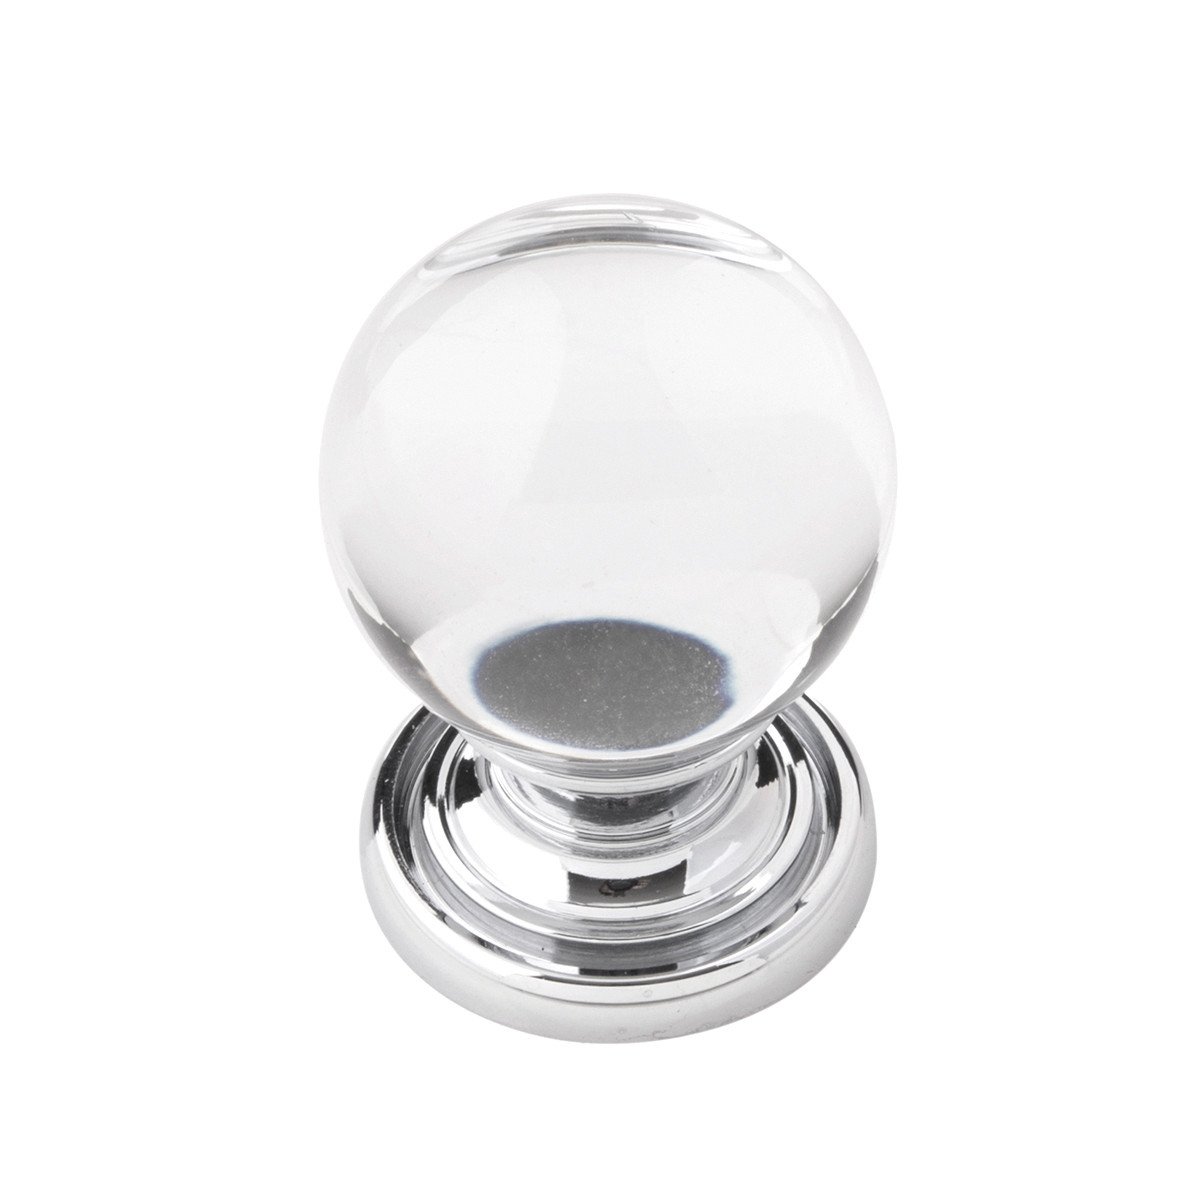 Belwith Keeler B076568-GLCH 1-1/8 In. Luster Knob - Glass with Chrome